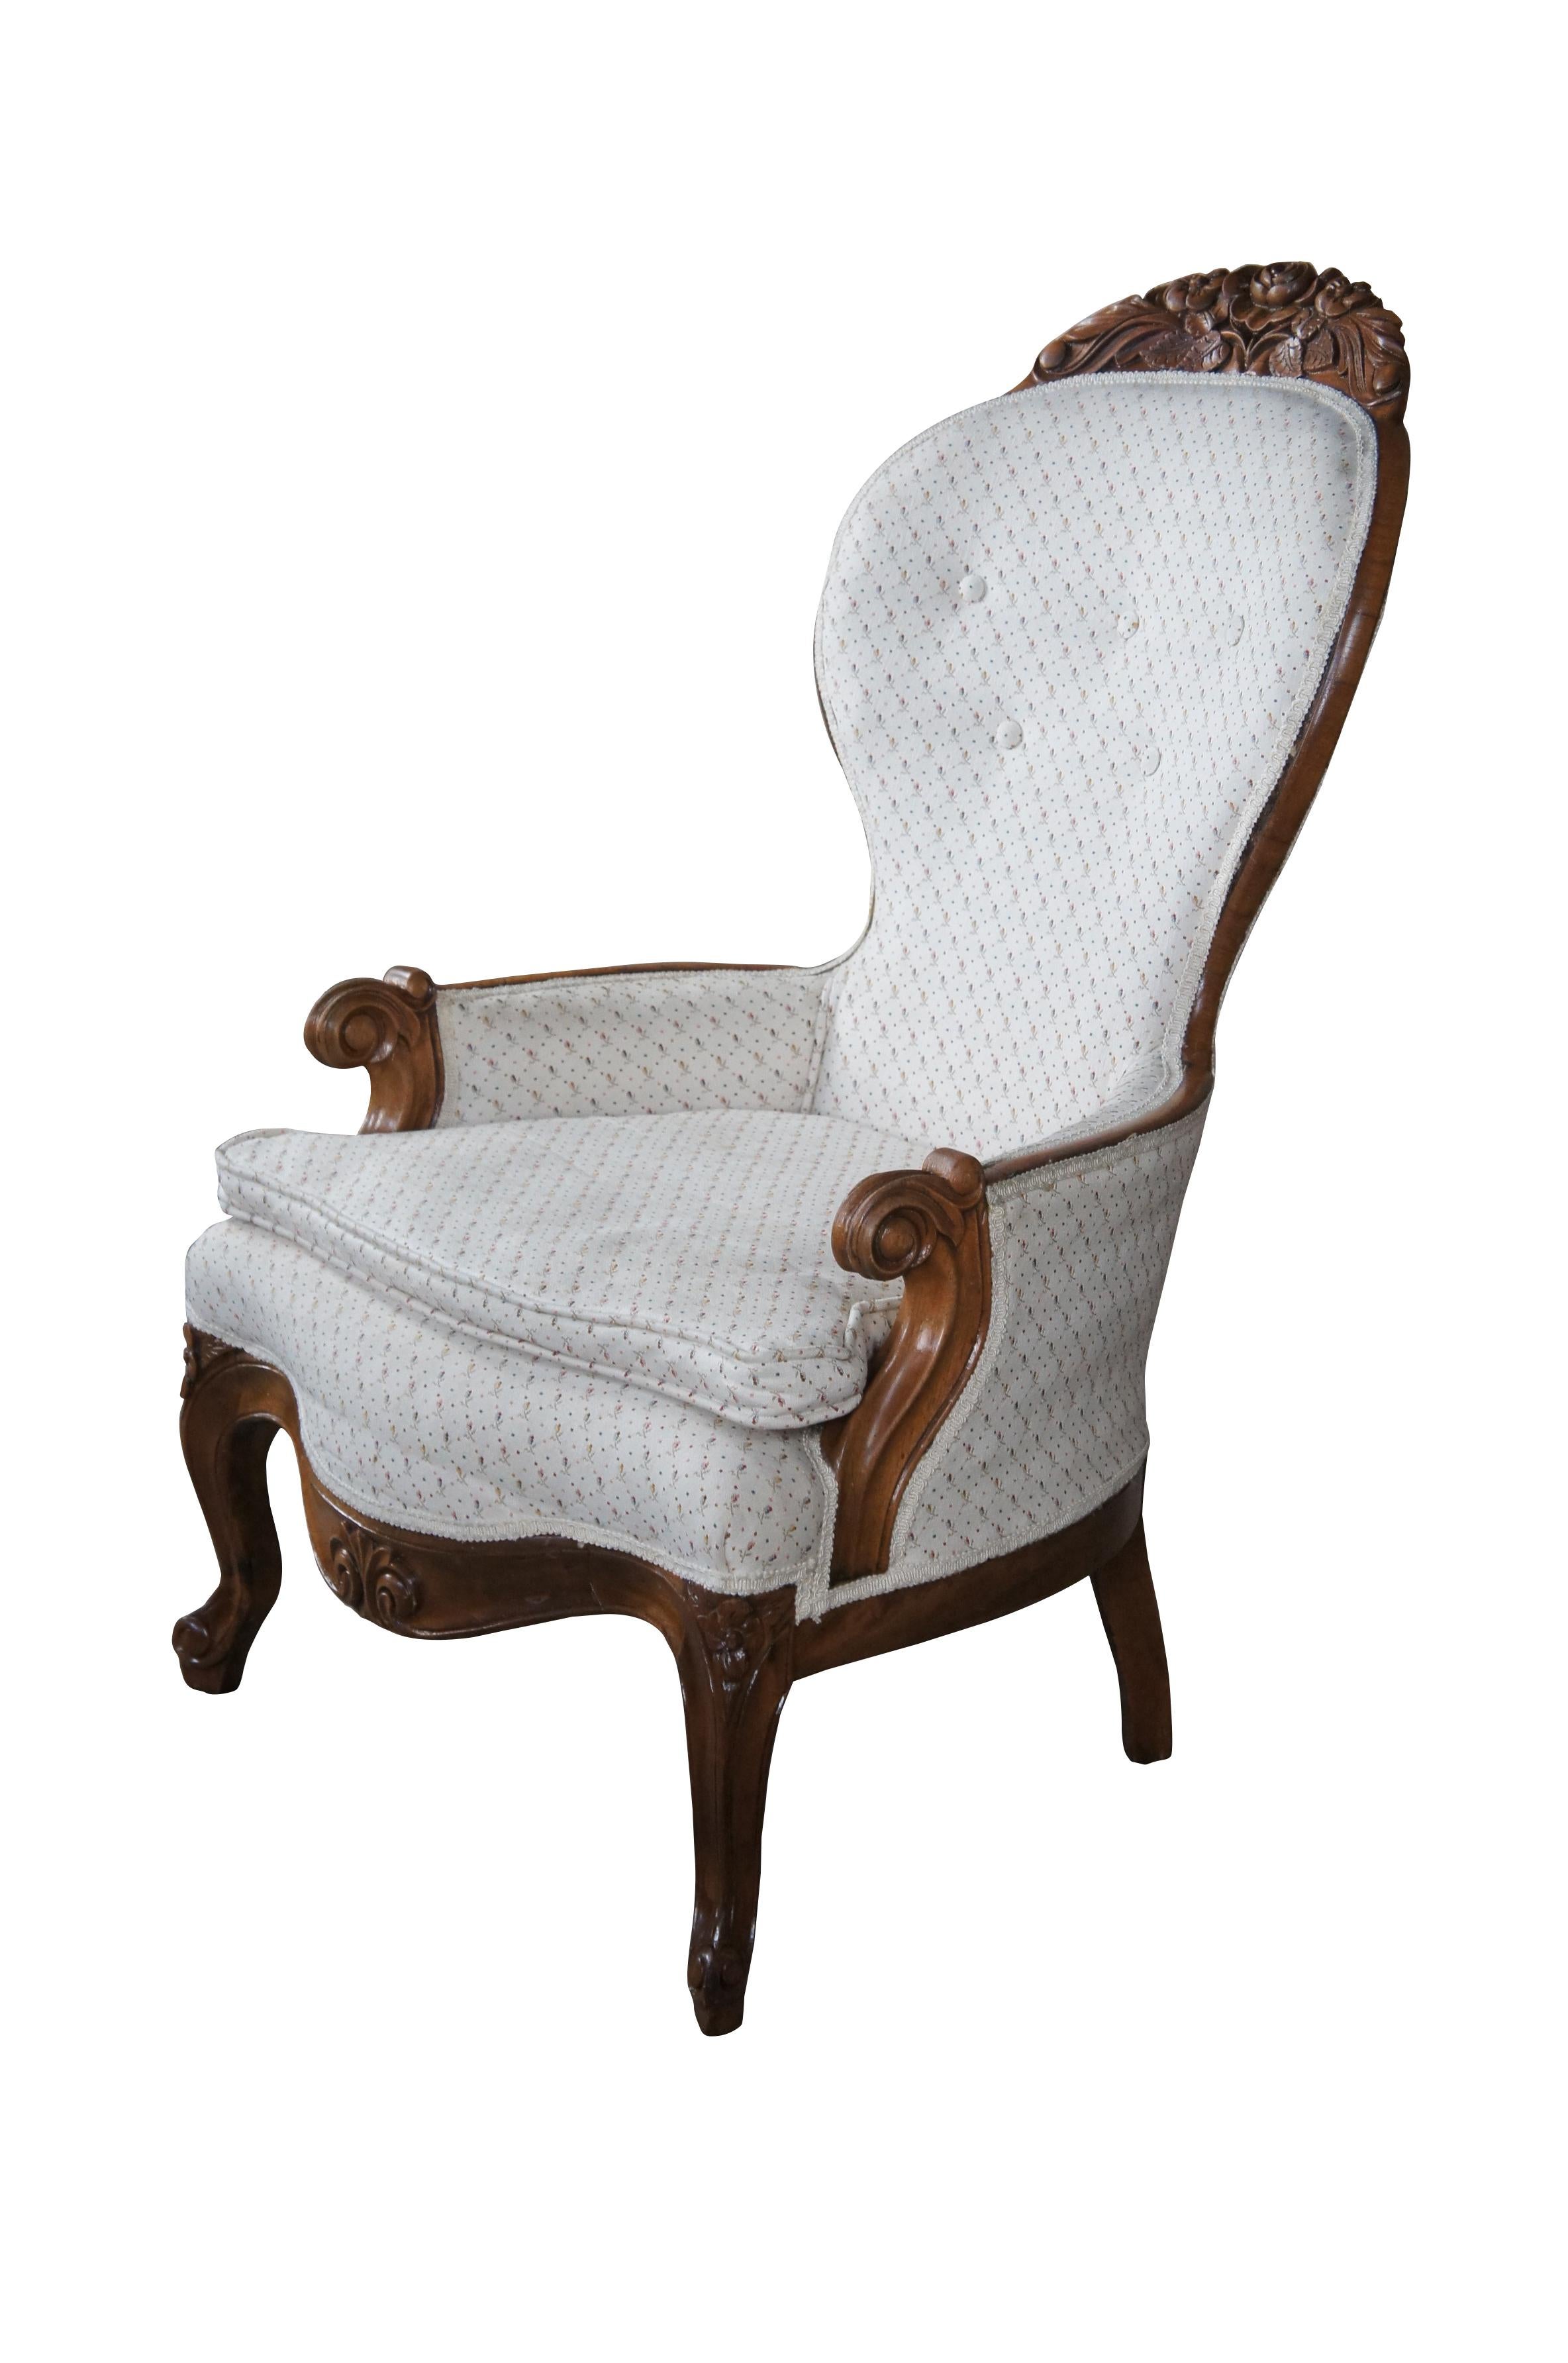 Antique Victorian Eastlake spoon back armchair.  Made of walnut featuring serpentine form with low relief carved floral crown, tufted back, scrolled arms and cabriole legs.

Dimensions:
35